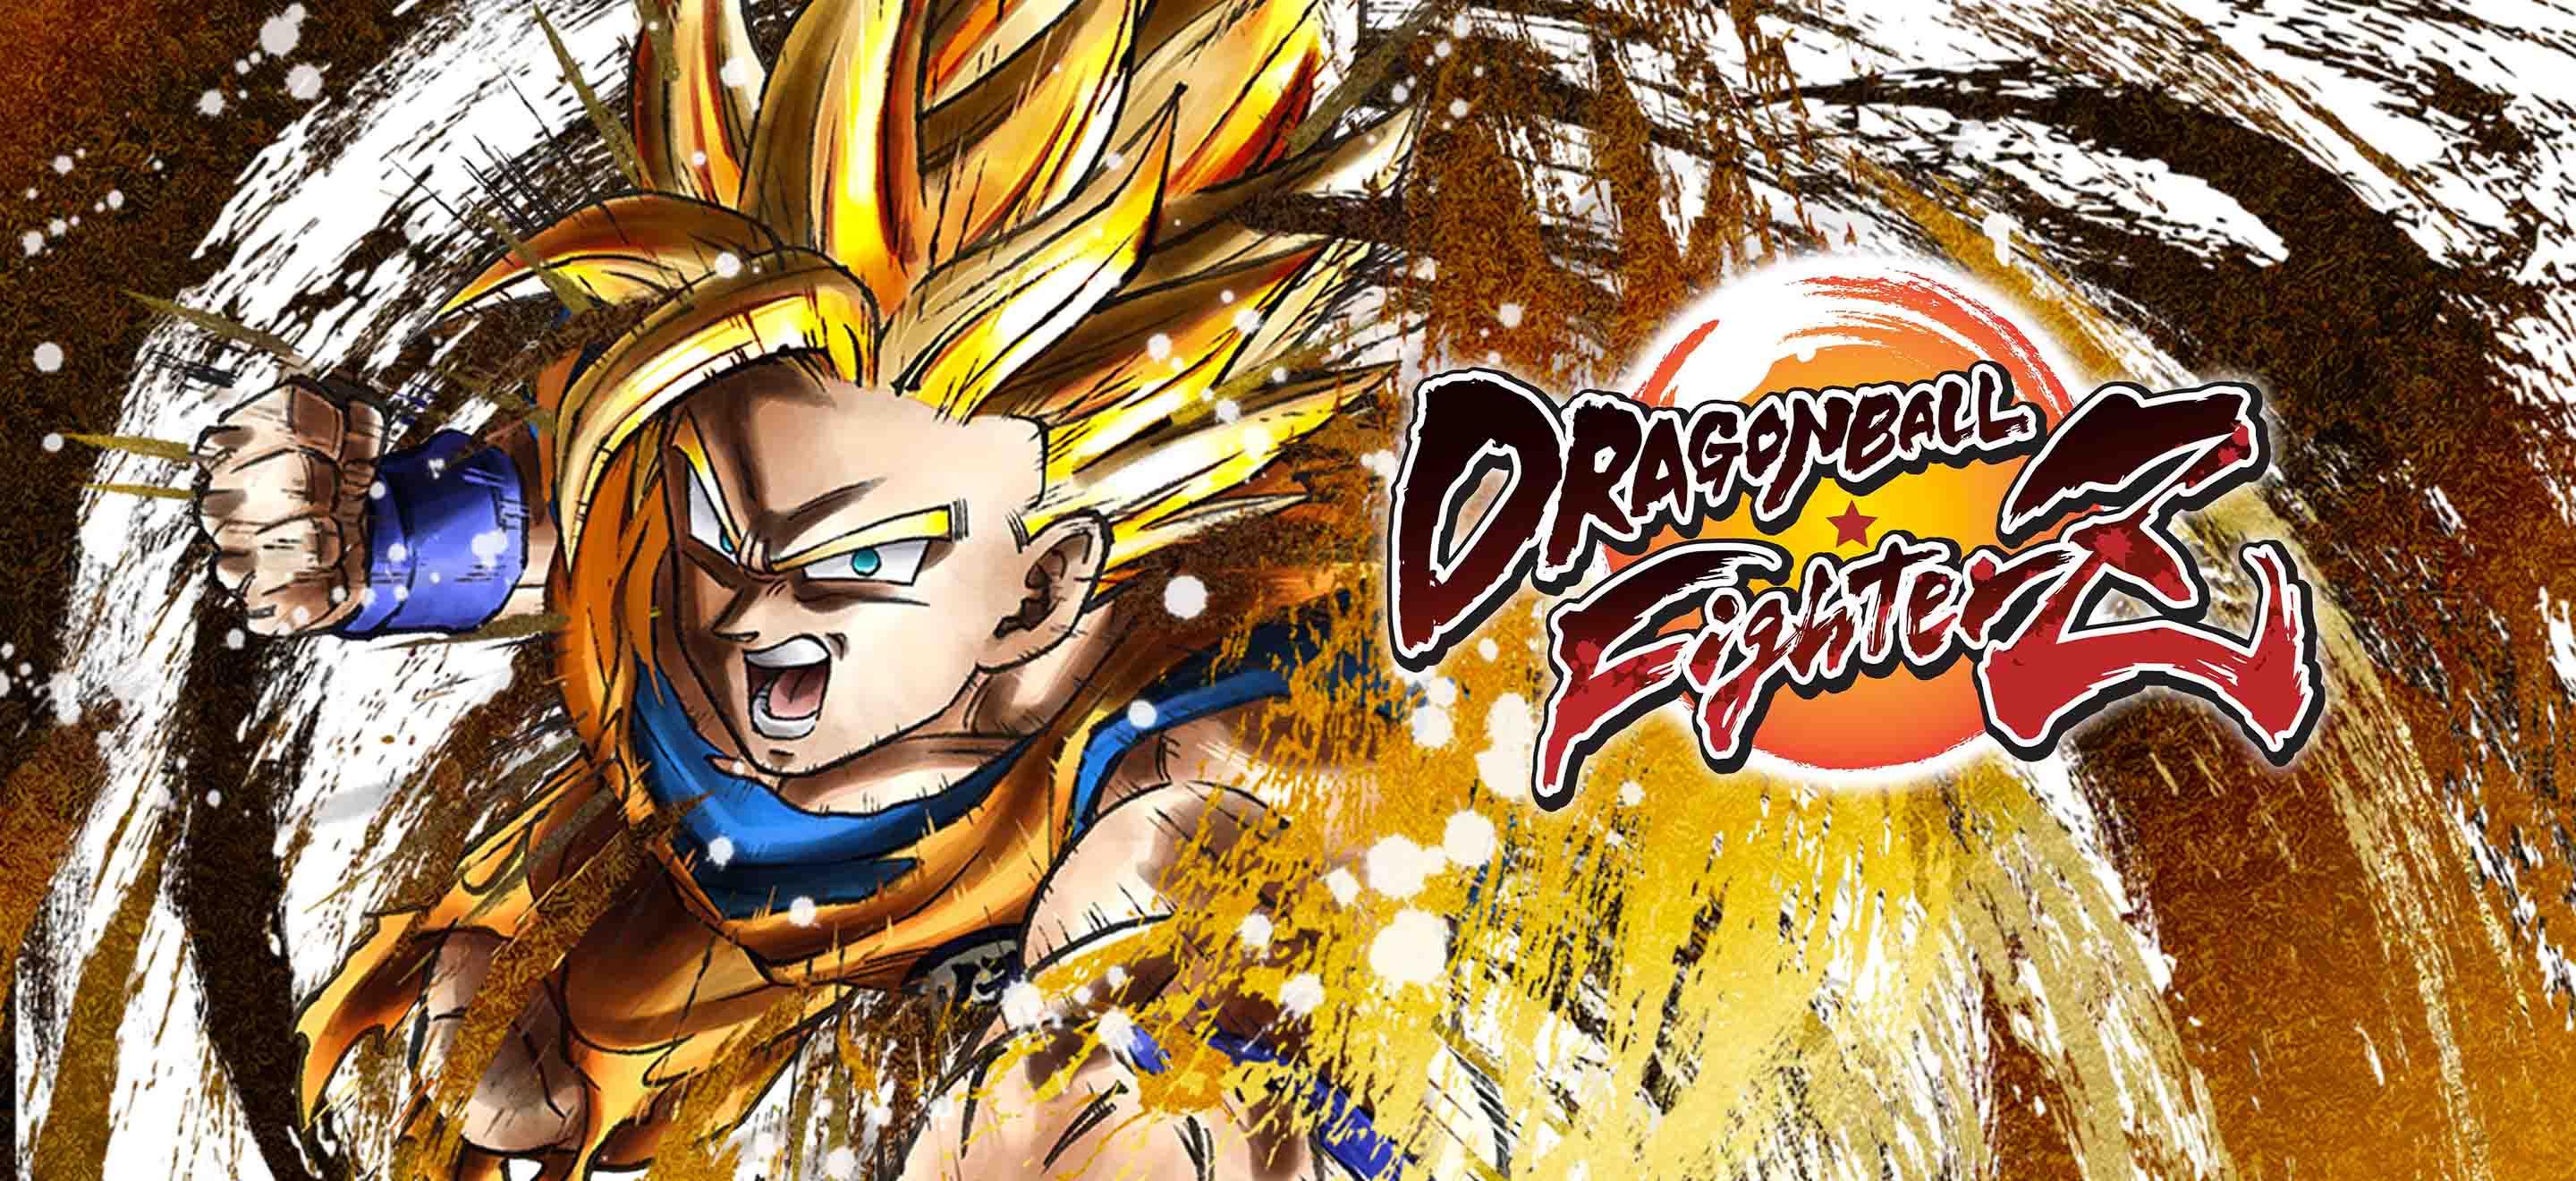 https://www.micromania.fr/on/demandware.static/-/Sites-Micromania-Library/default/dw3aa50a22/fanzone/dossier/dragonball/dragon-ball-fighterZ-header.jpg